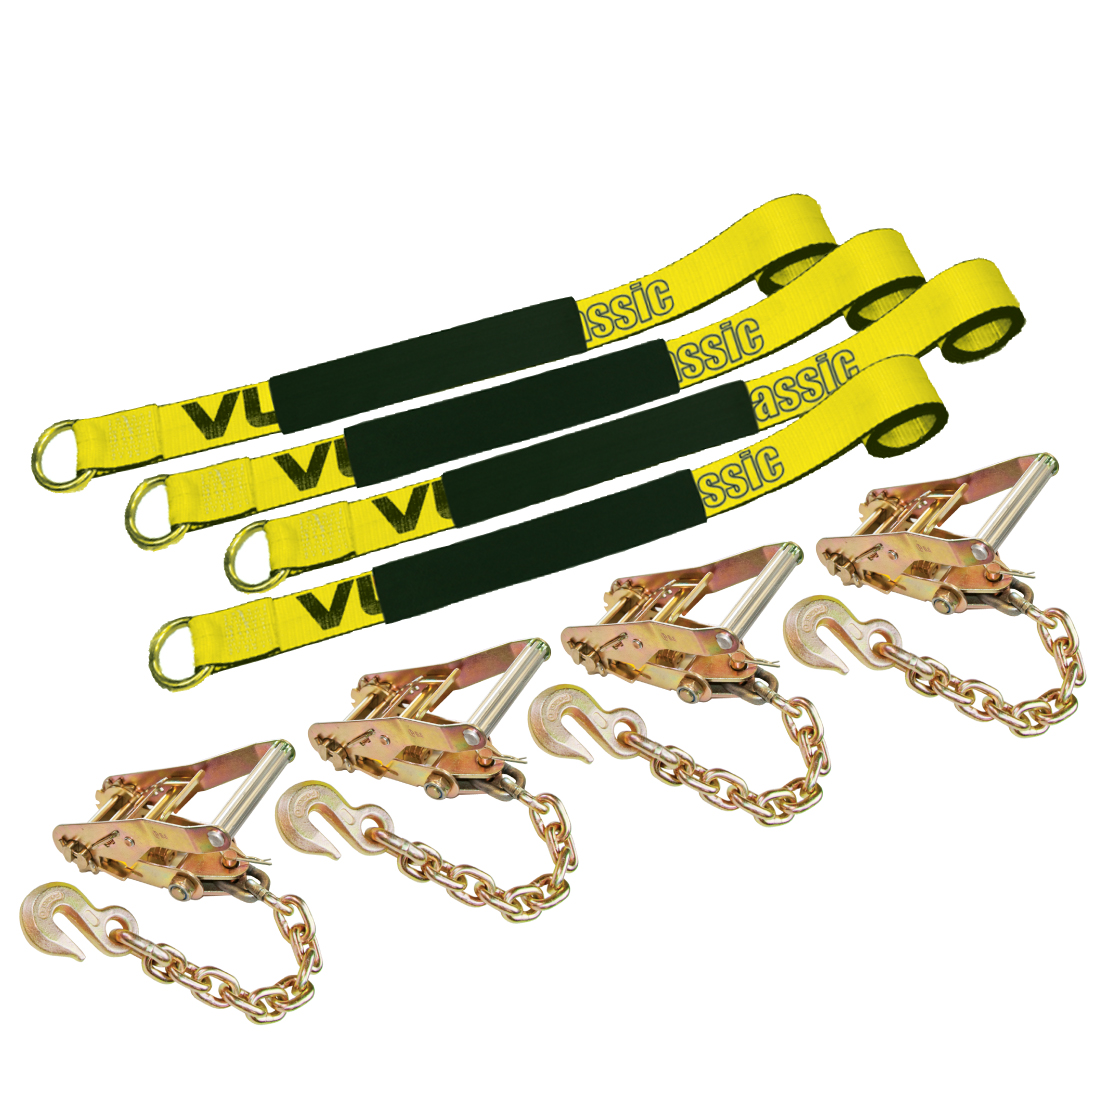 Product launch: Multi-cable clip for ValkPro+ roof carriers - Van